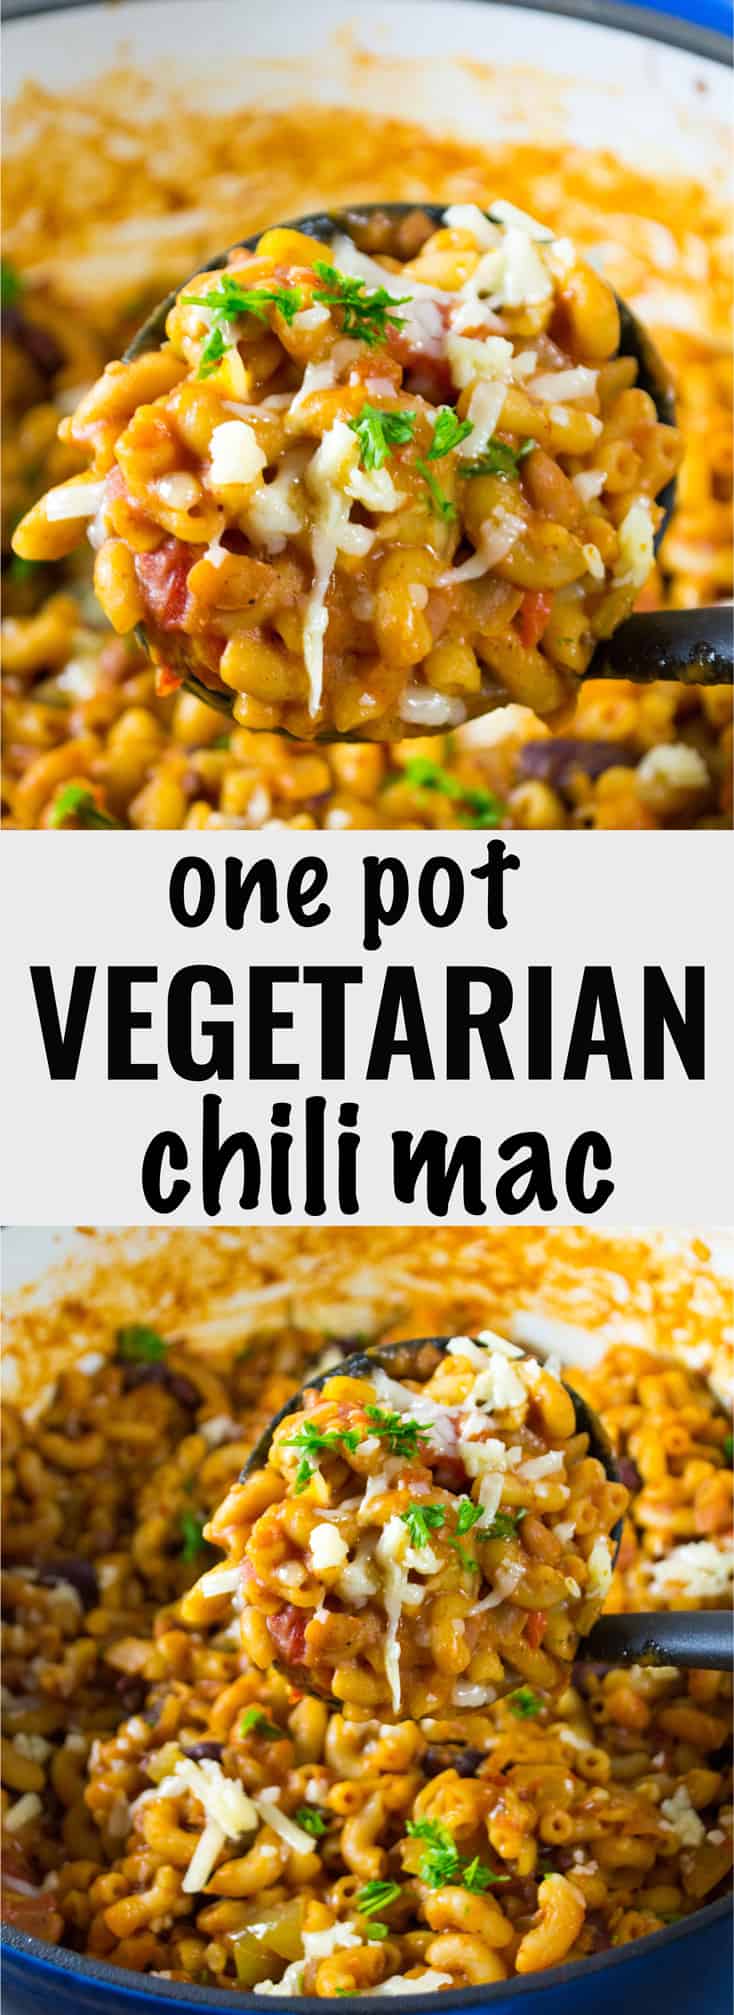 Easy One pot chili mac recipe that comes together in less than 30 minutes. Rave reviews on pinterest! #vegetarian #chilimac #meatless #dinner